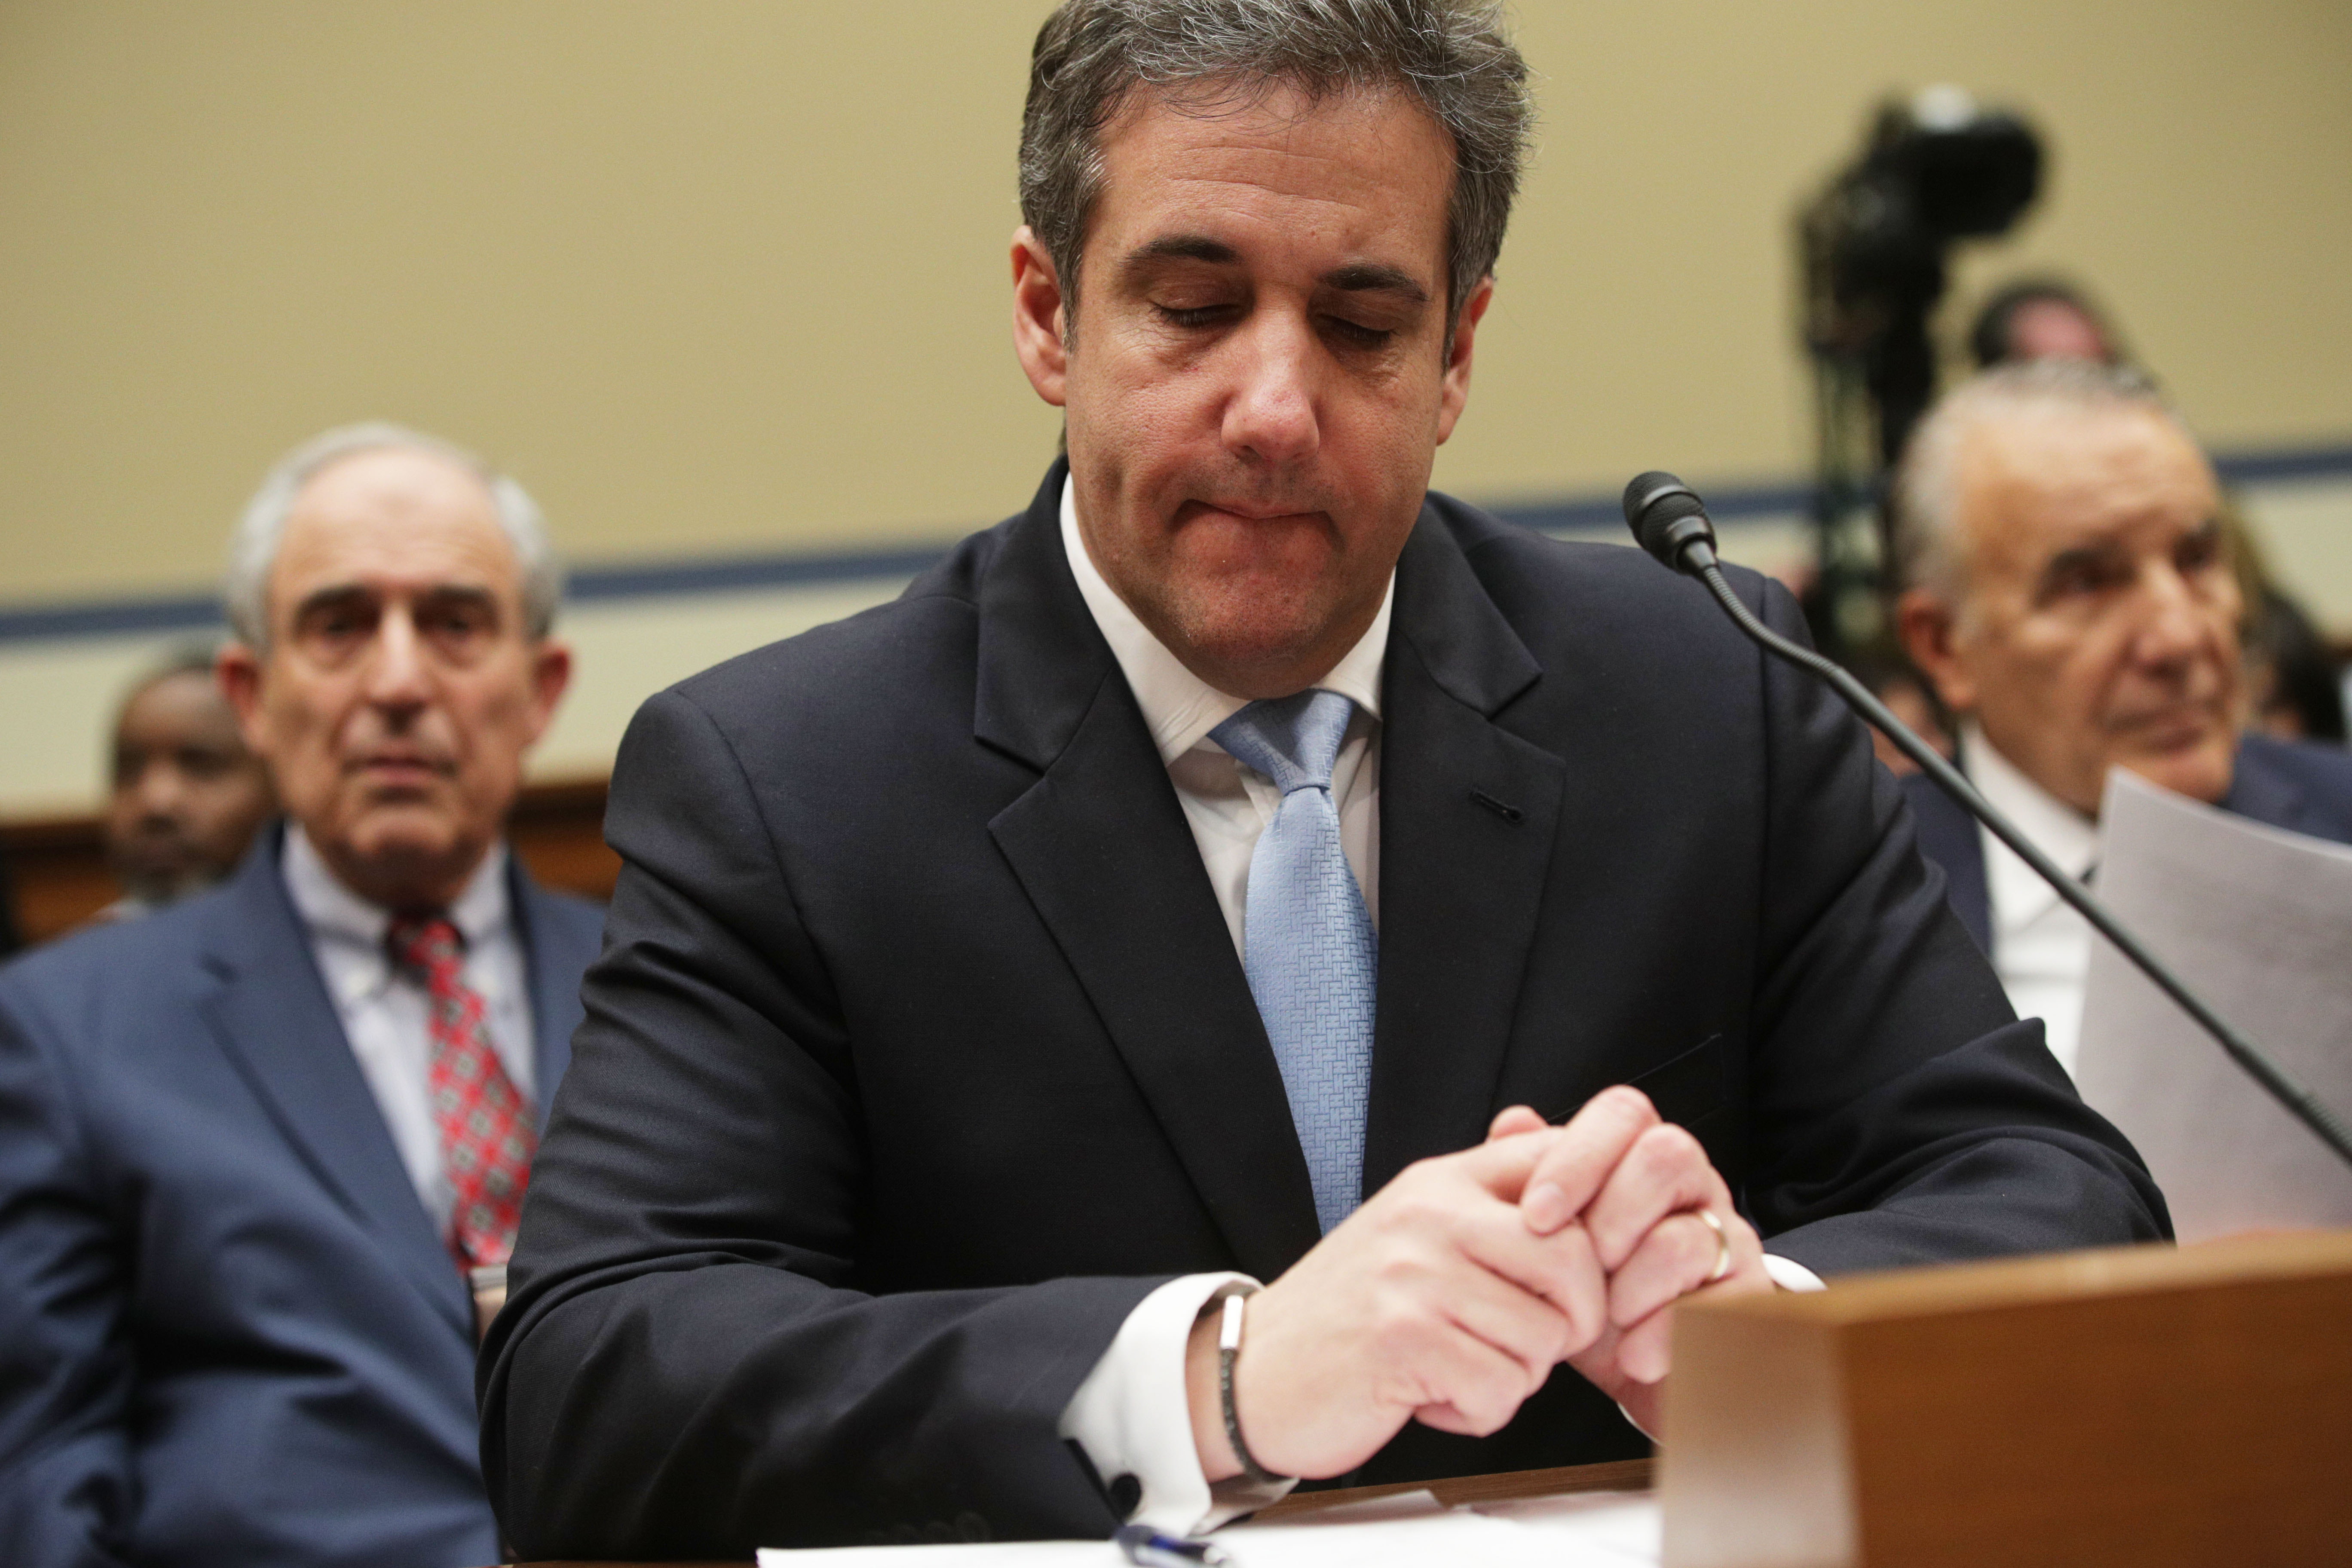 Michael Cohen, former attorney for President Donald Trump, testifies before the House Oversight Committee on February 27, 2019. (Alex Wong/Getty Images)